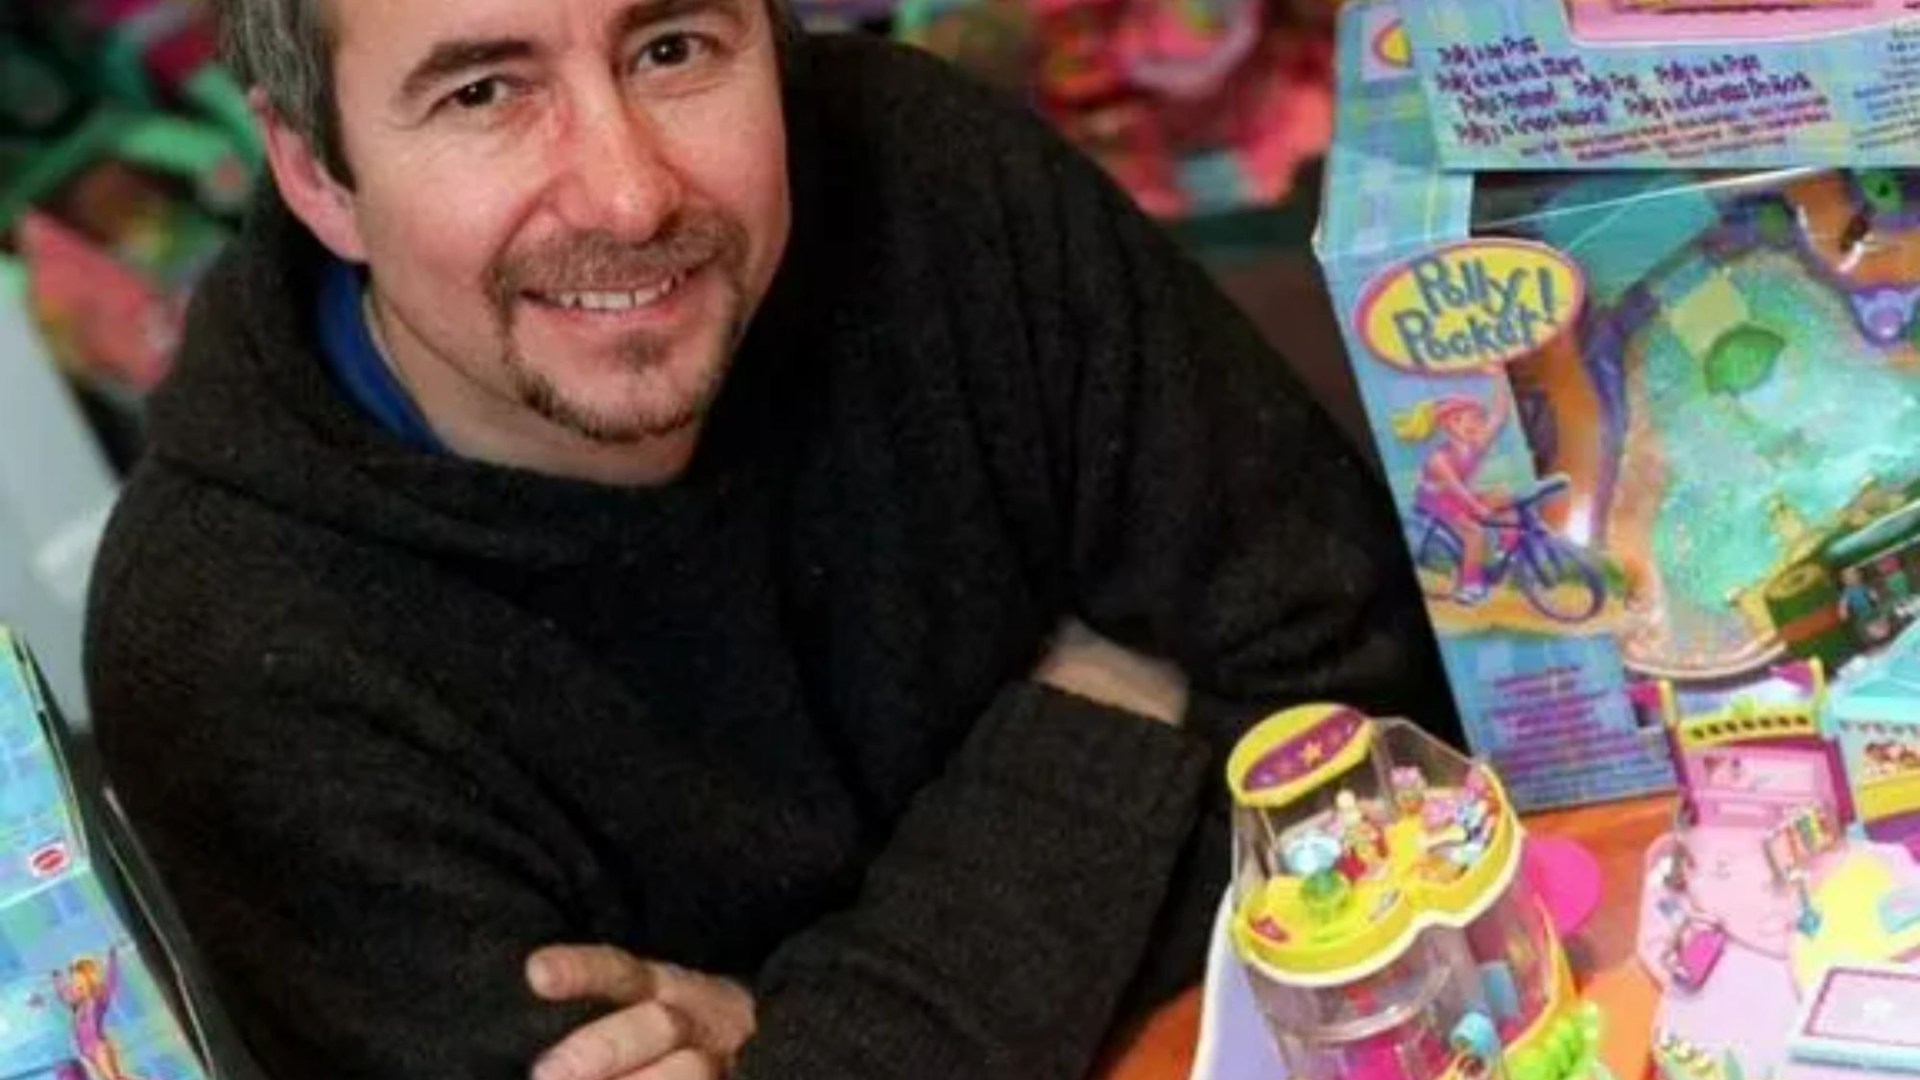 Chris Wiggs dead: British inventor who created Polly Pocket dies aged 74 after rare cancer battle [Video]